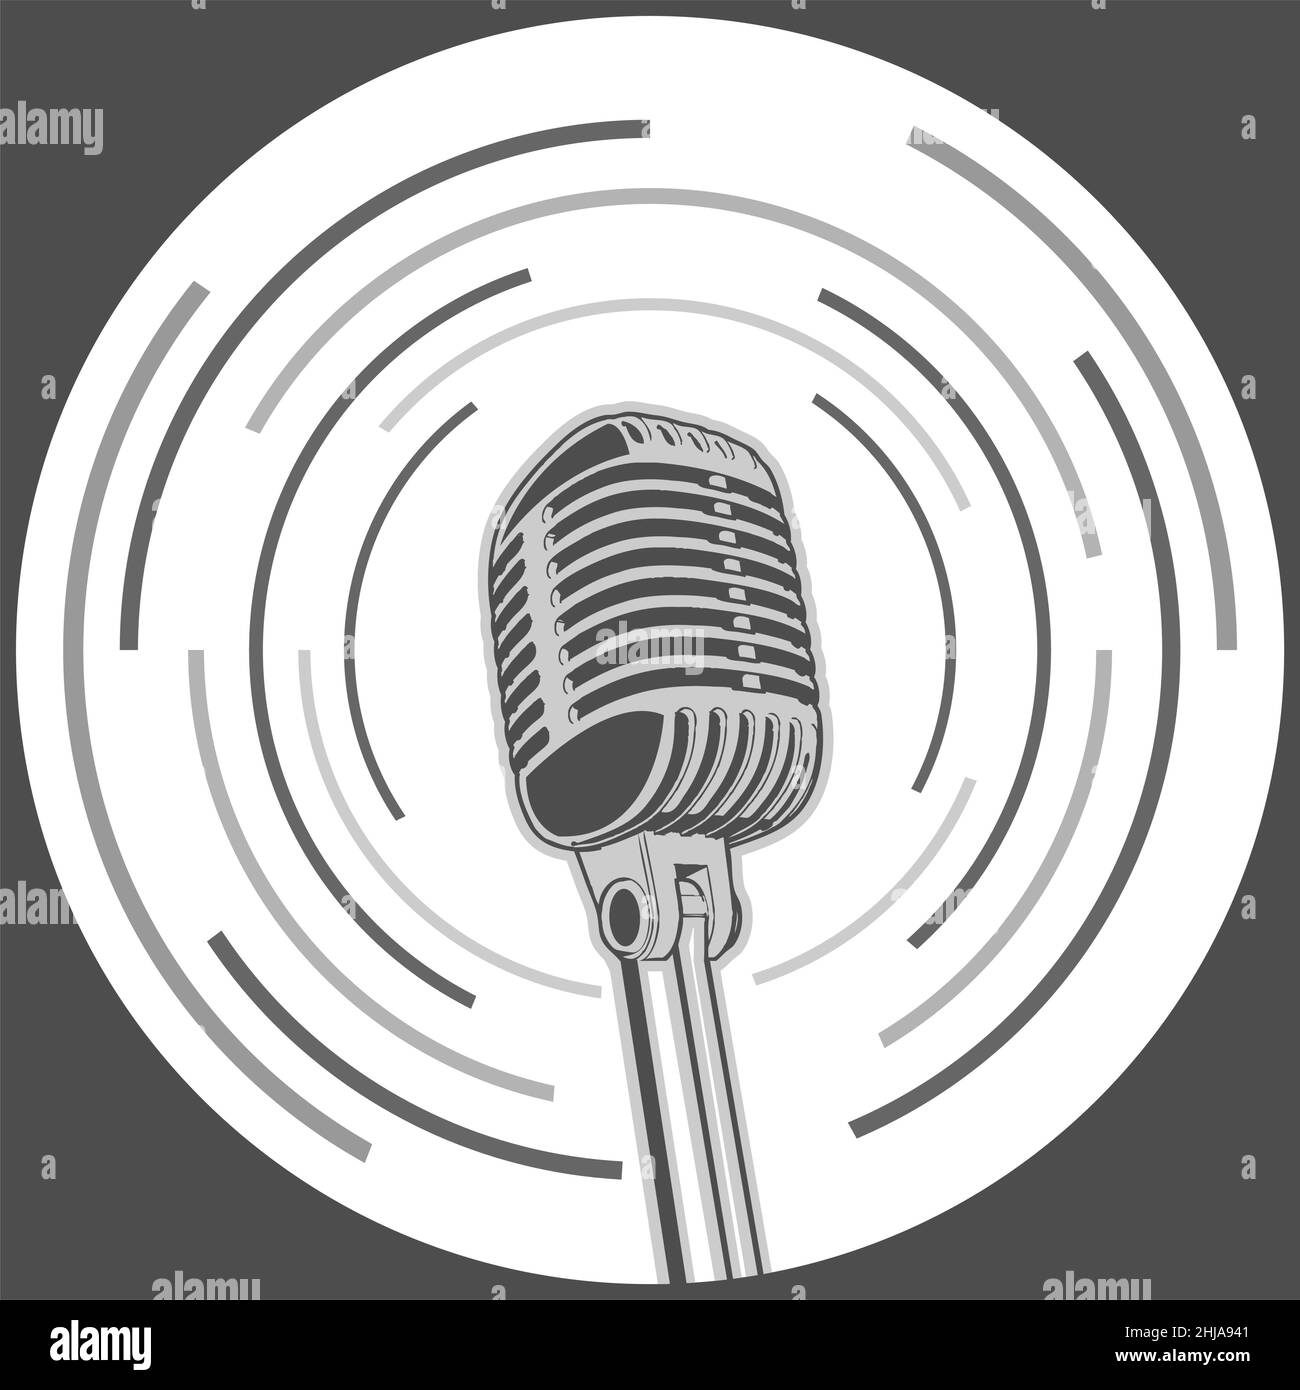 RETRO MICROPHONE SILHOUETTE, VINTAGE STYLE. DESIGN ELEMENT FOR MUSIC LOGOS. Stock Vector